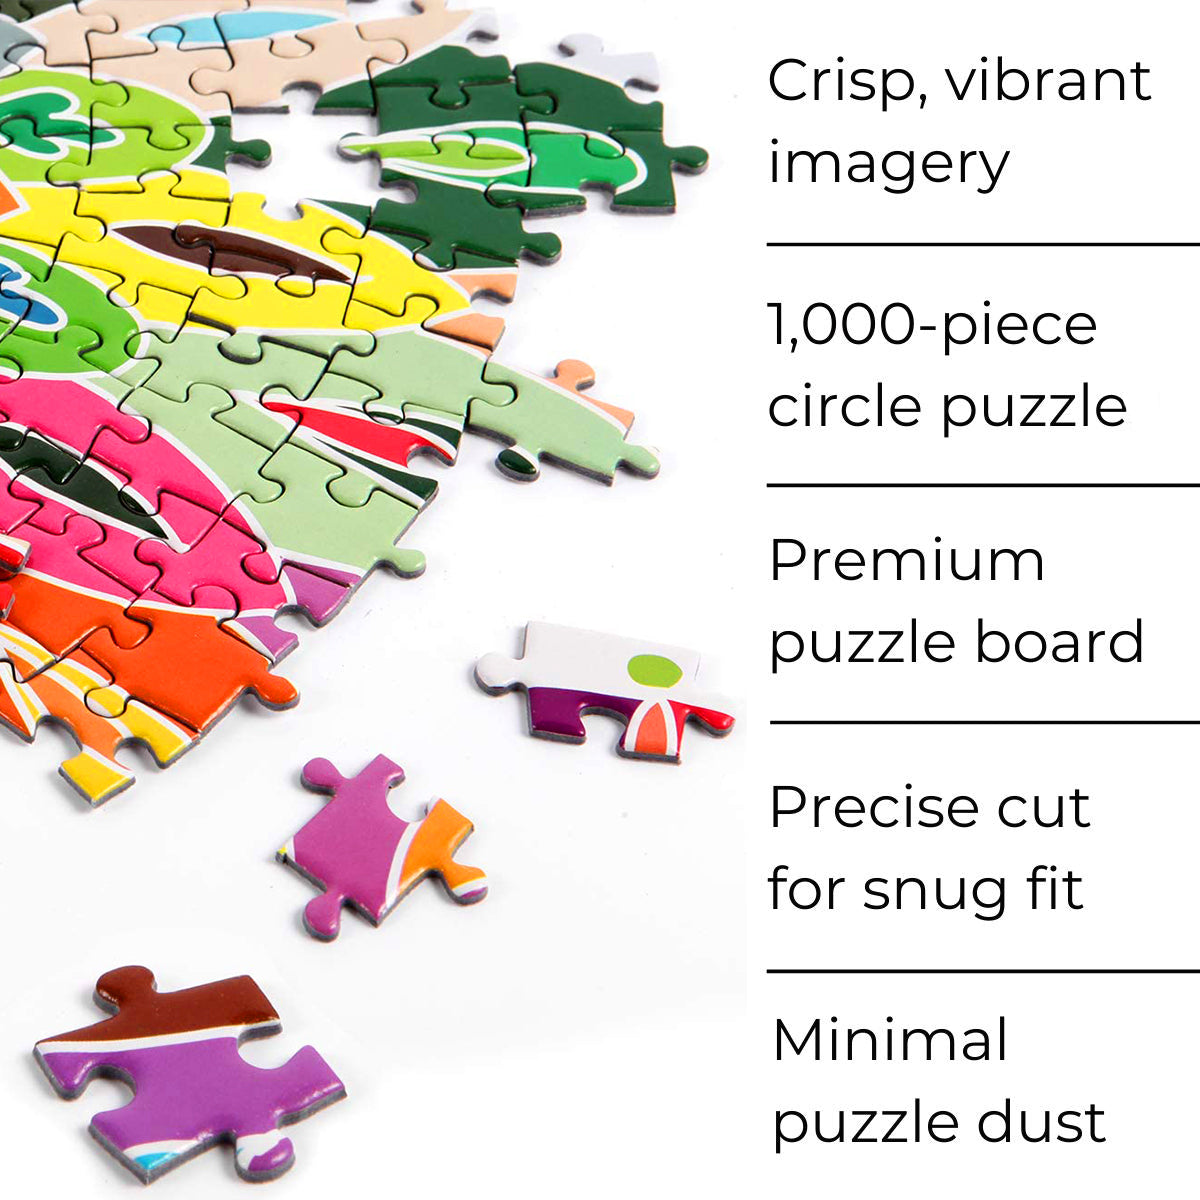 Crisp, vibrant colourful mandala on a premium puzzle board. Our jigsaw pieces are precise cut for snug fit with minimal puzzle dust.